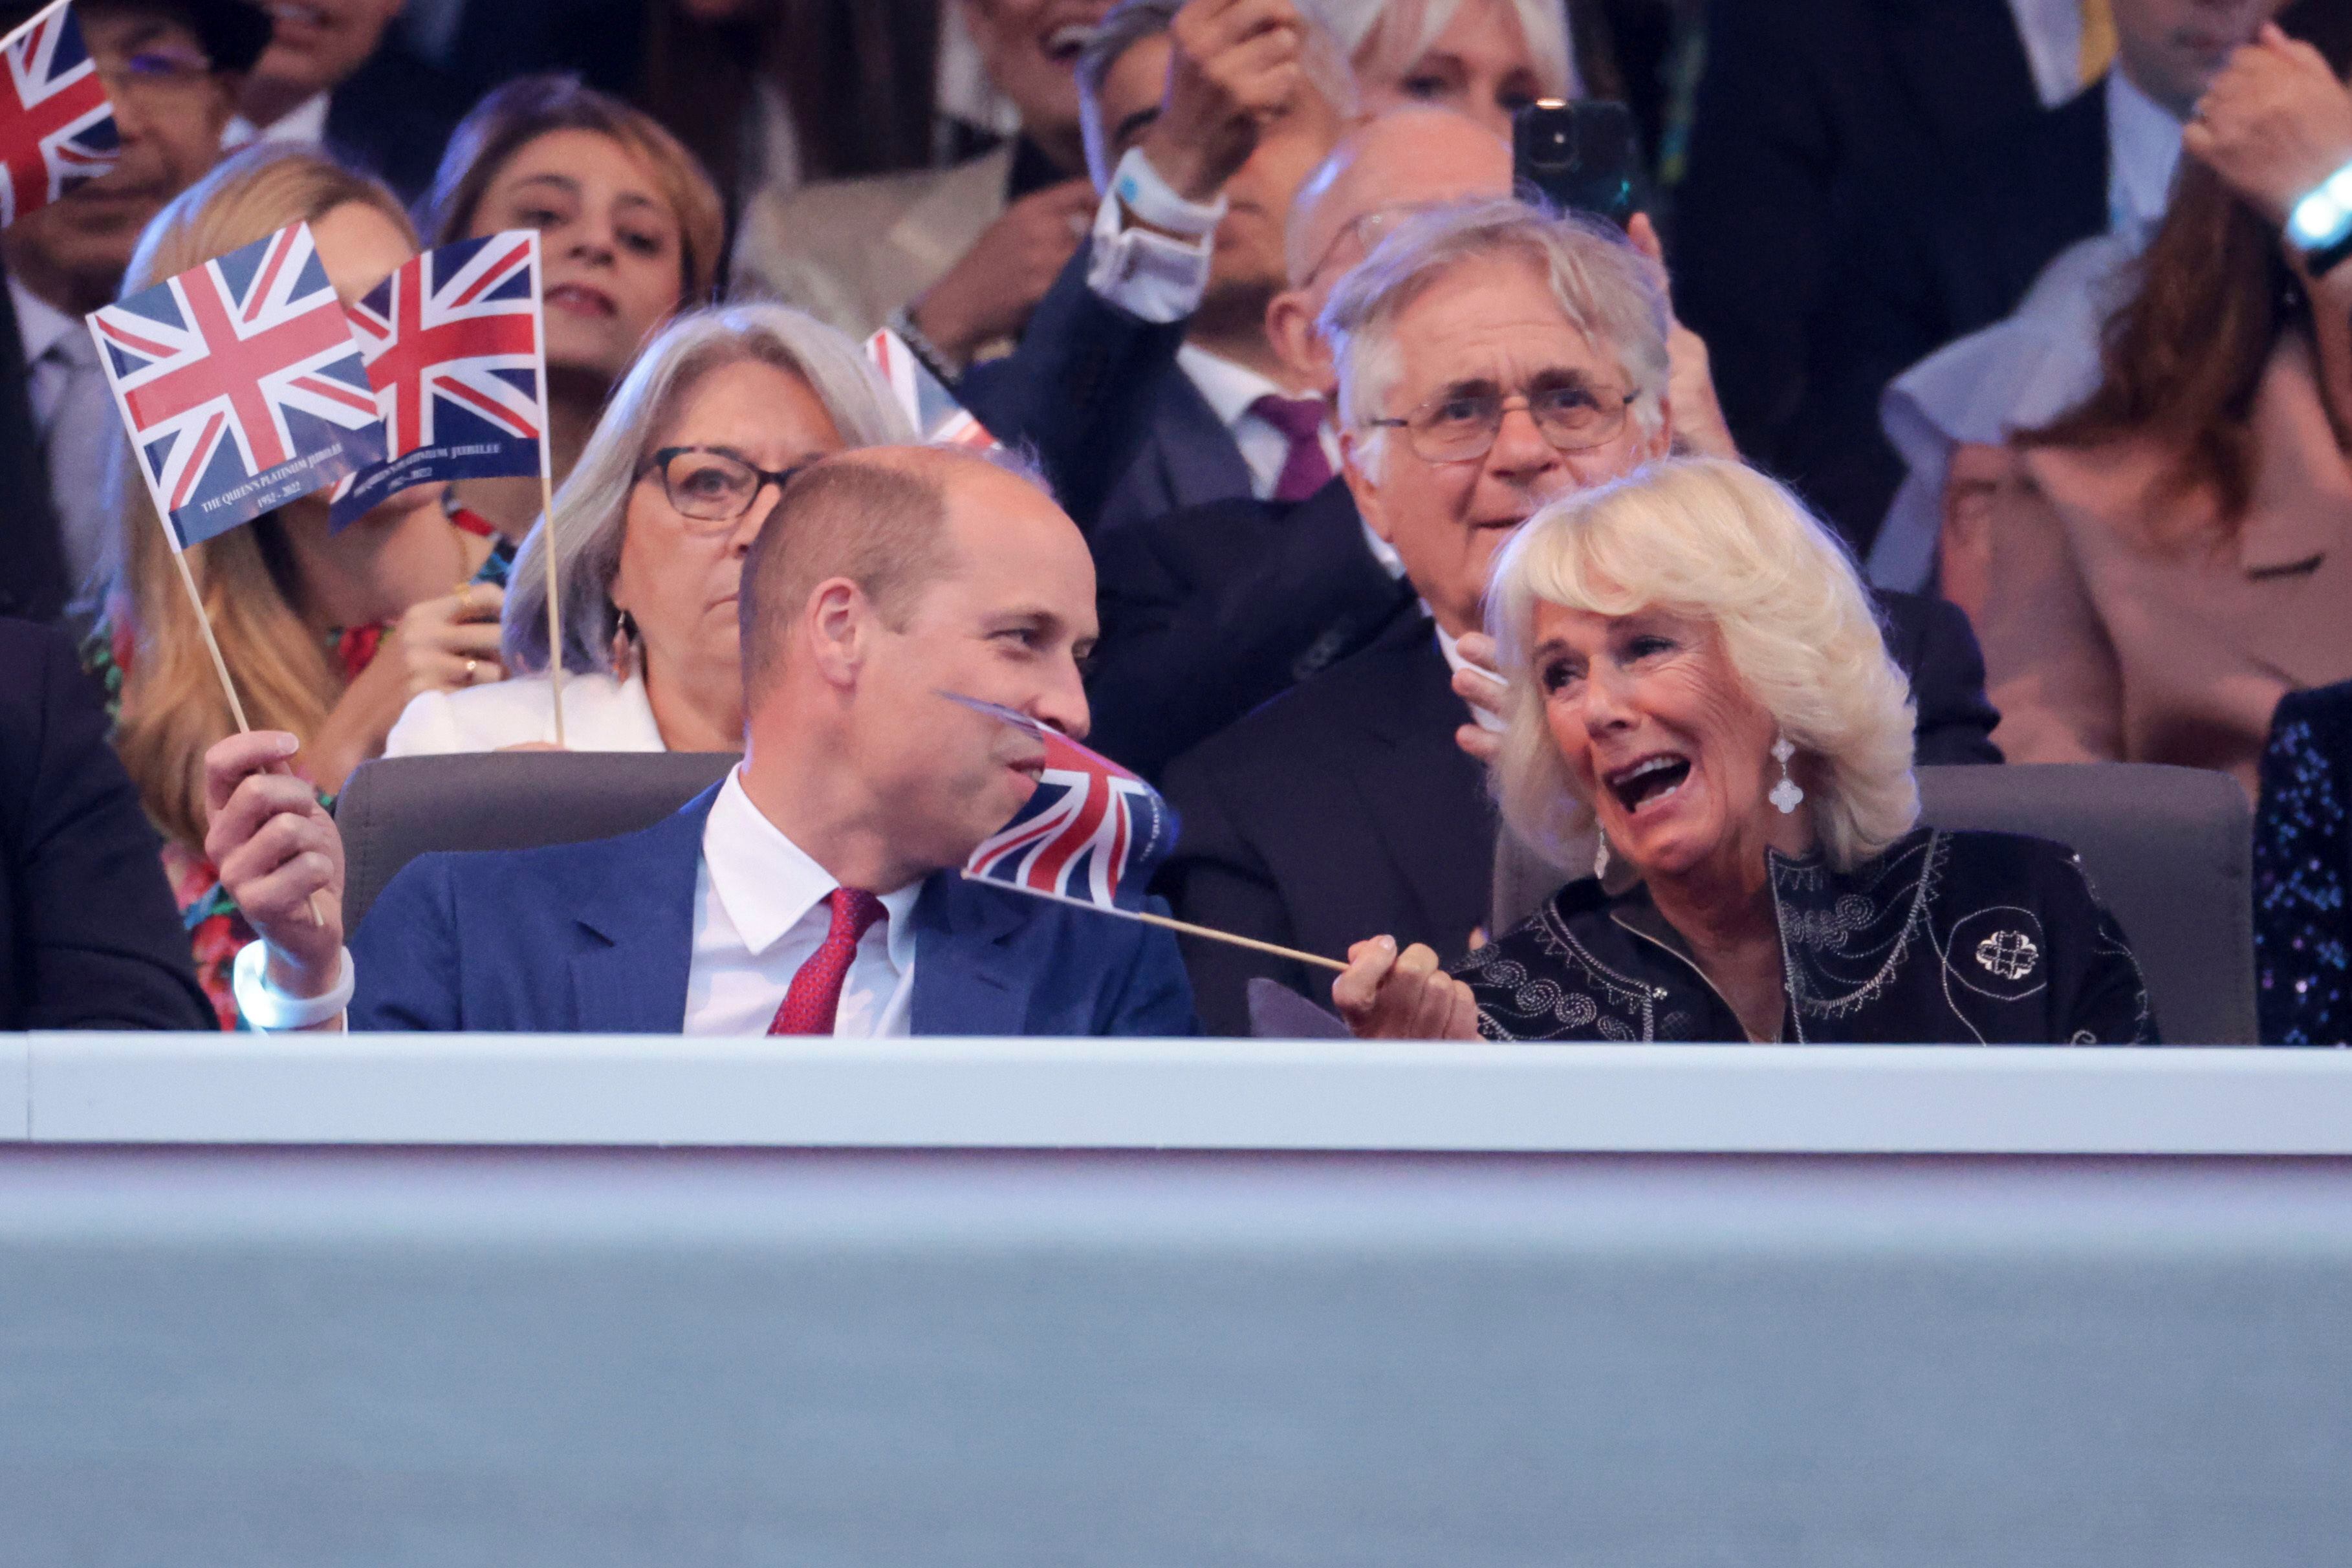 Prince William and Camilla, Duchess of Cornwall watch the Platinum Jubilee concert taking place outside Buckingham Palace, London on the third of four days of celebrations to mark the Platinum Jubilee.